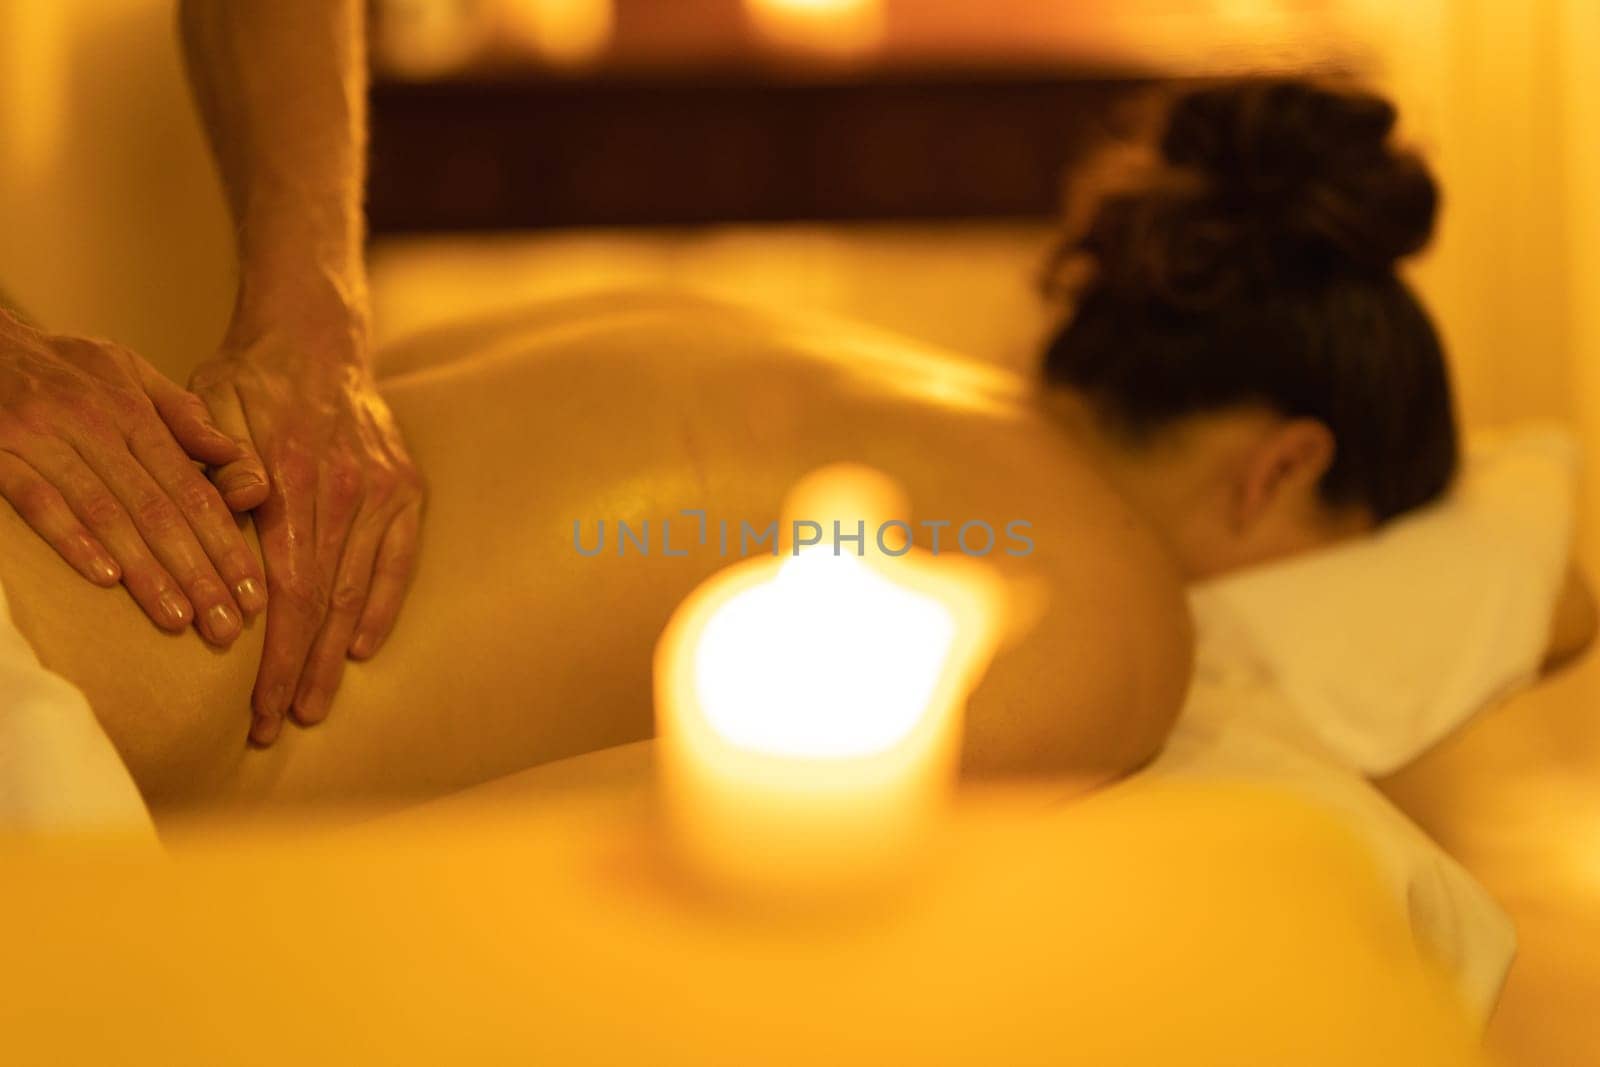 Massage session - massaging lower back of a woman in SPA salon. Mid shot